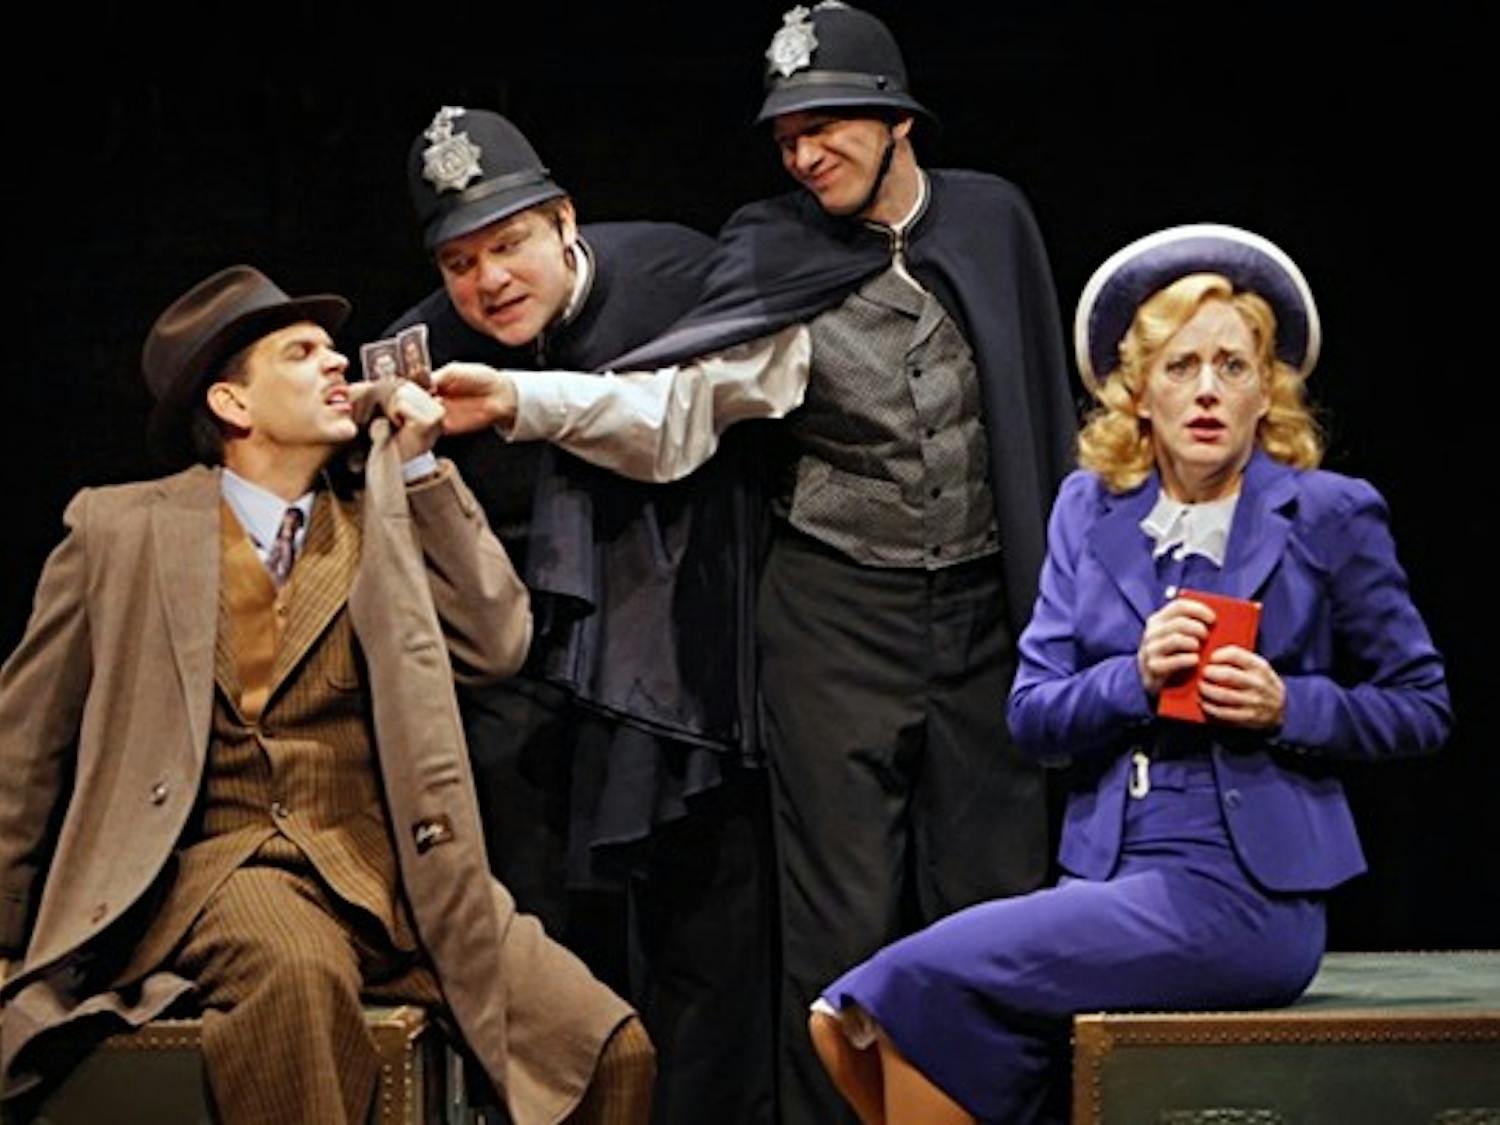 Robert O. Berdahl, Luverne Seifert, Jim Lichtsheidl and Sarah Agnew in "Alfred Hitchcock's The 39 Steps." (Photo by Michael Daniel, courtesy of Arizona Theatre Company)